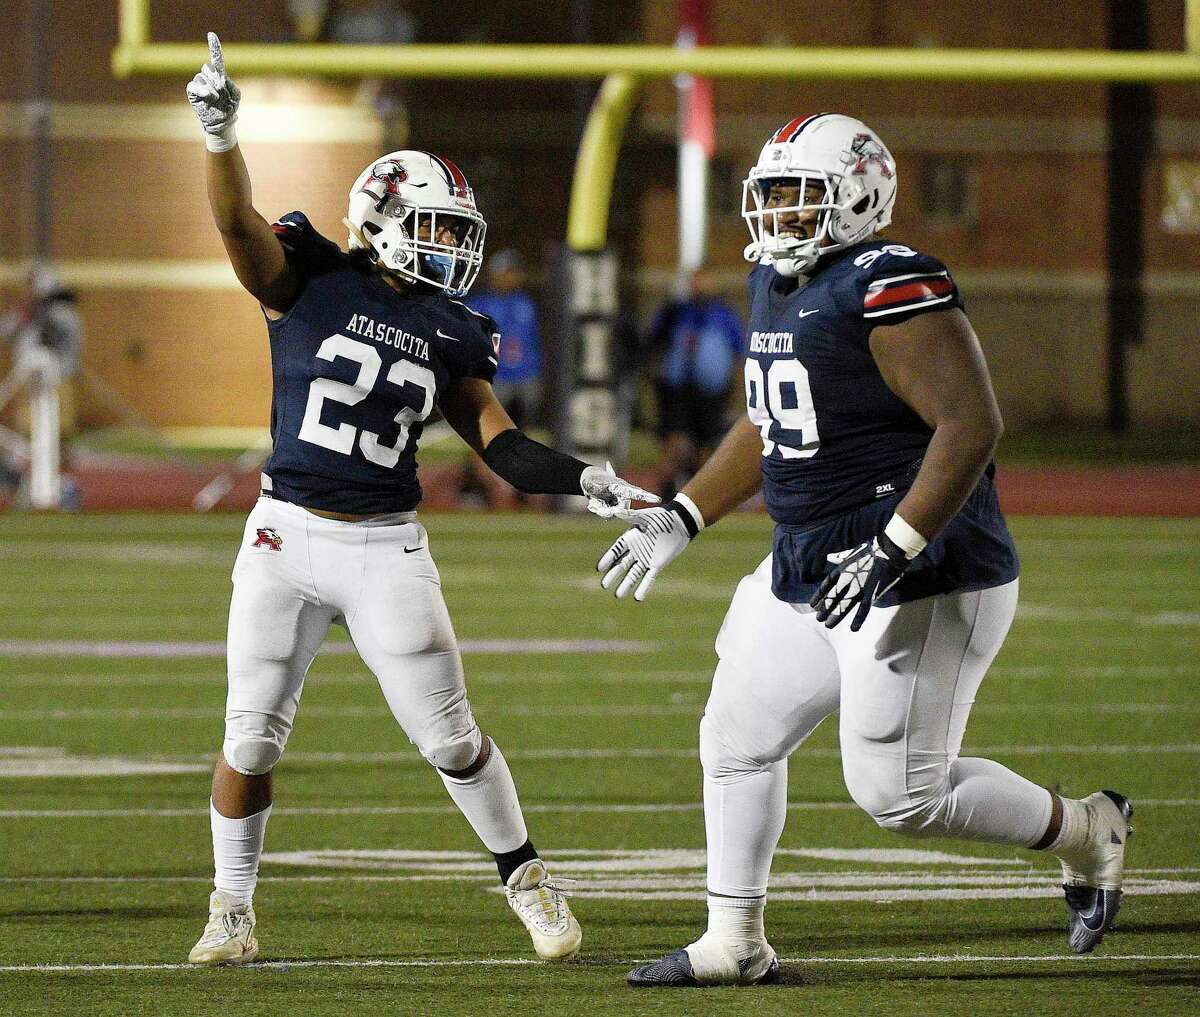 Atascocita linebacker Jadon Ducos (23) and defensive lineman Samu Taumanupepe (99) celebrate a fumble recovery during the second half of a high school football game against C.E. King, Saturday, Oct. 16, 2021, in Humble.